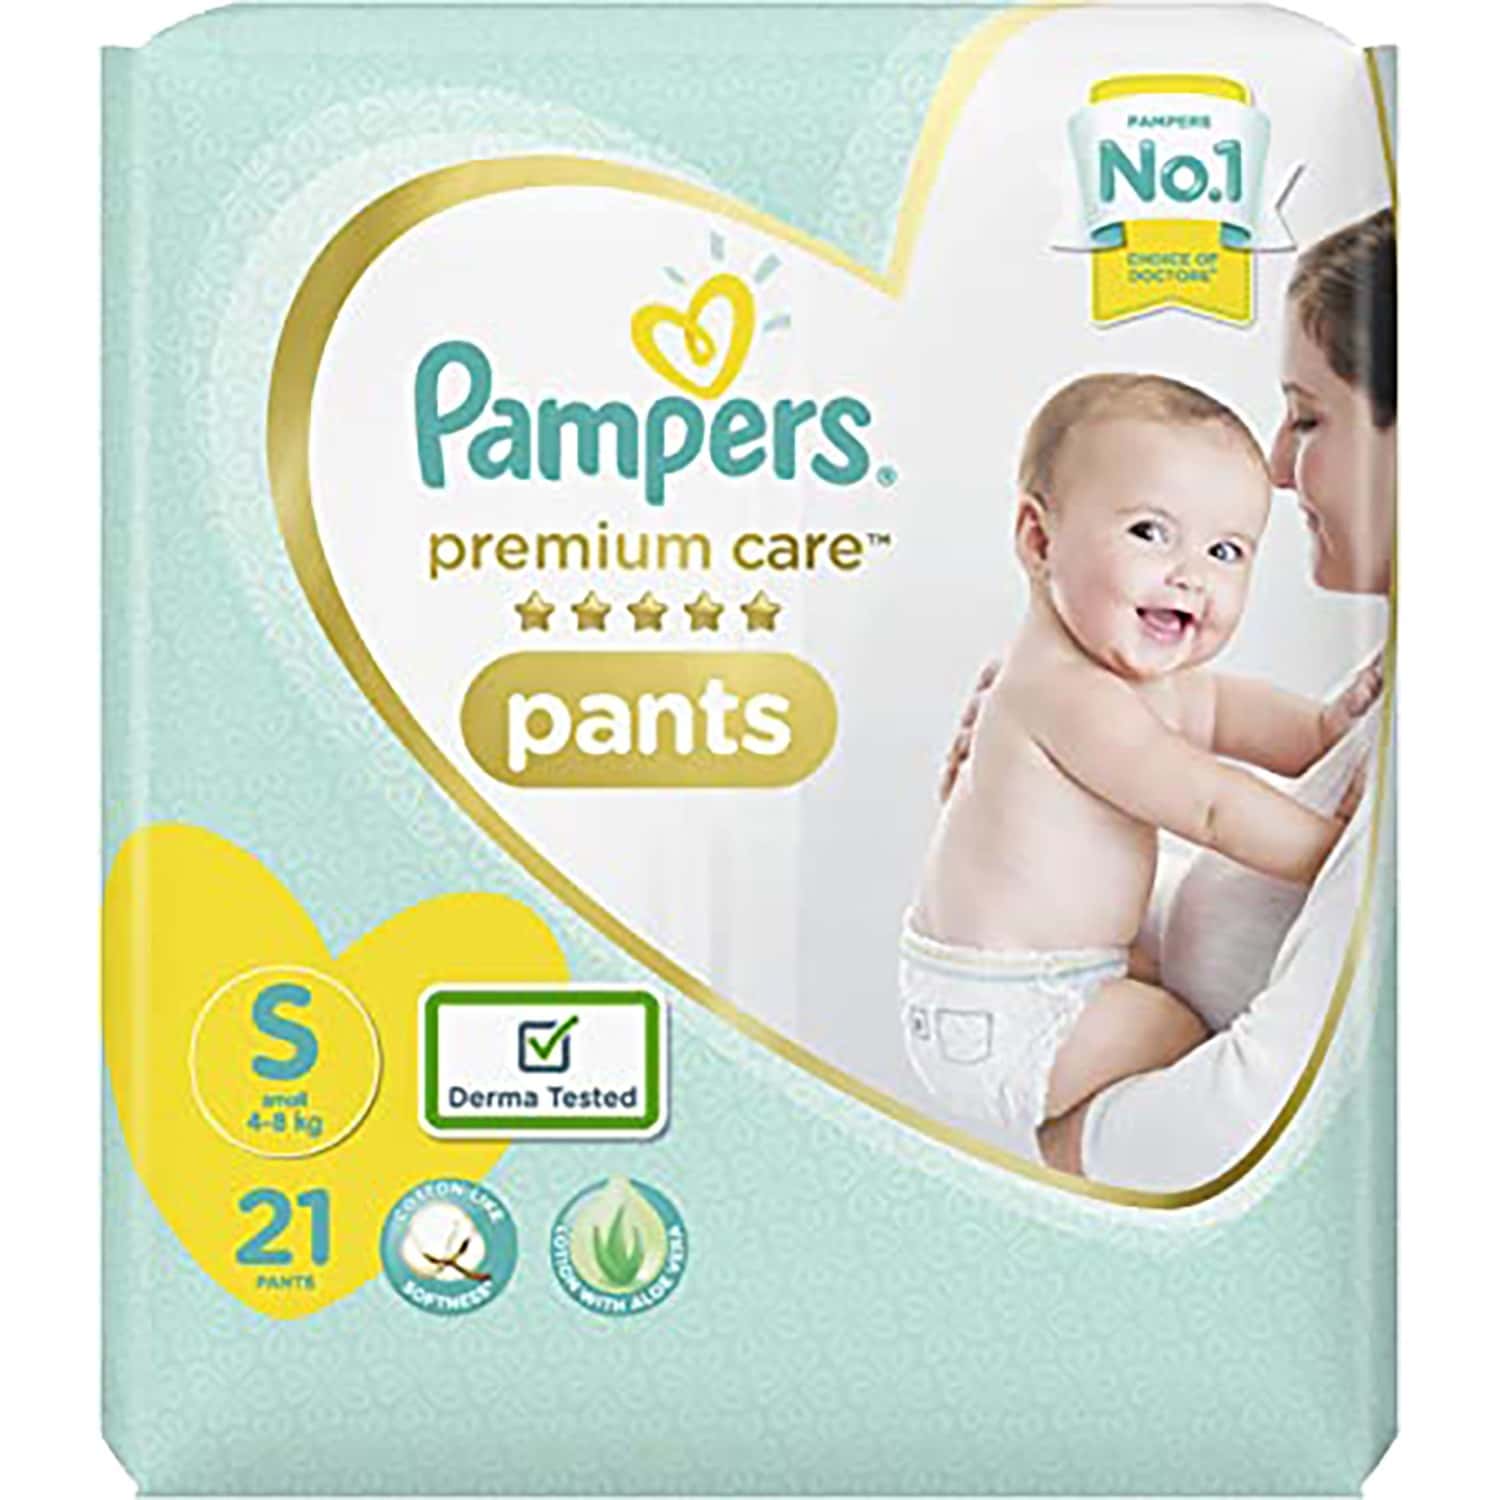 Pampers Active Baby Small (3-8 Kg) 22 Diaper pants - S - Buy 22 Pampers  Pant Diapers | Flipkart.com